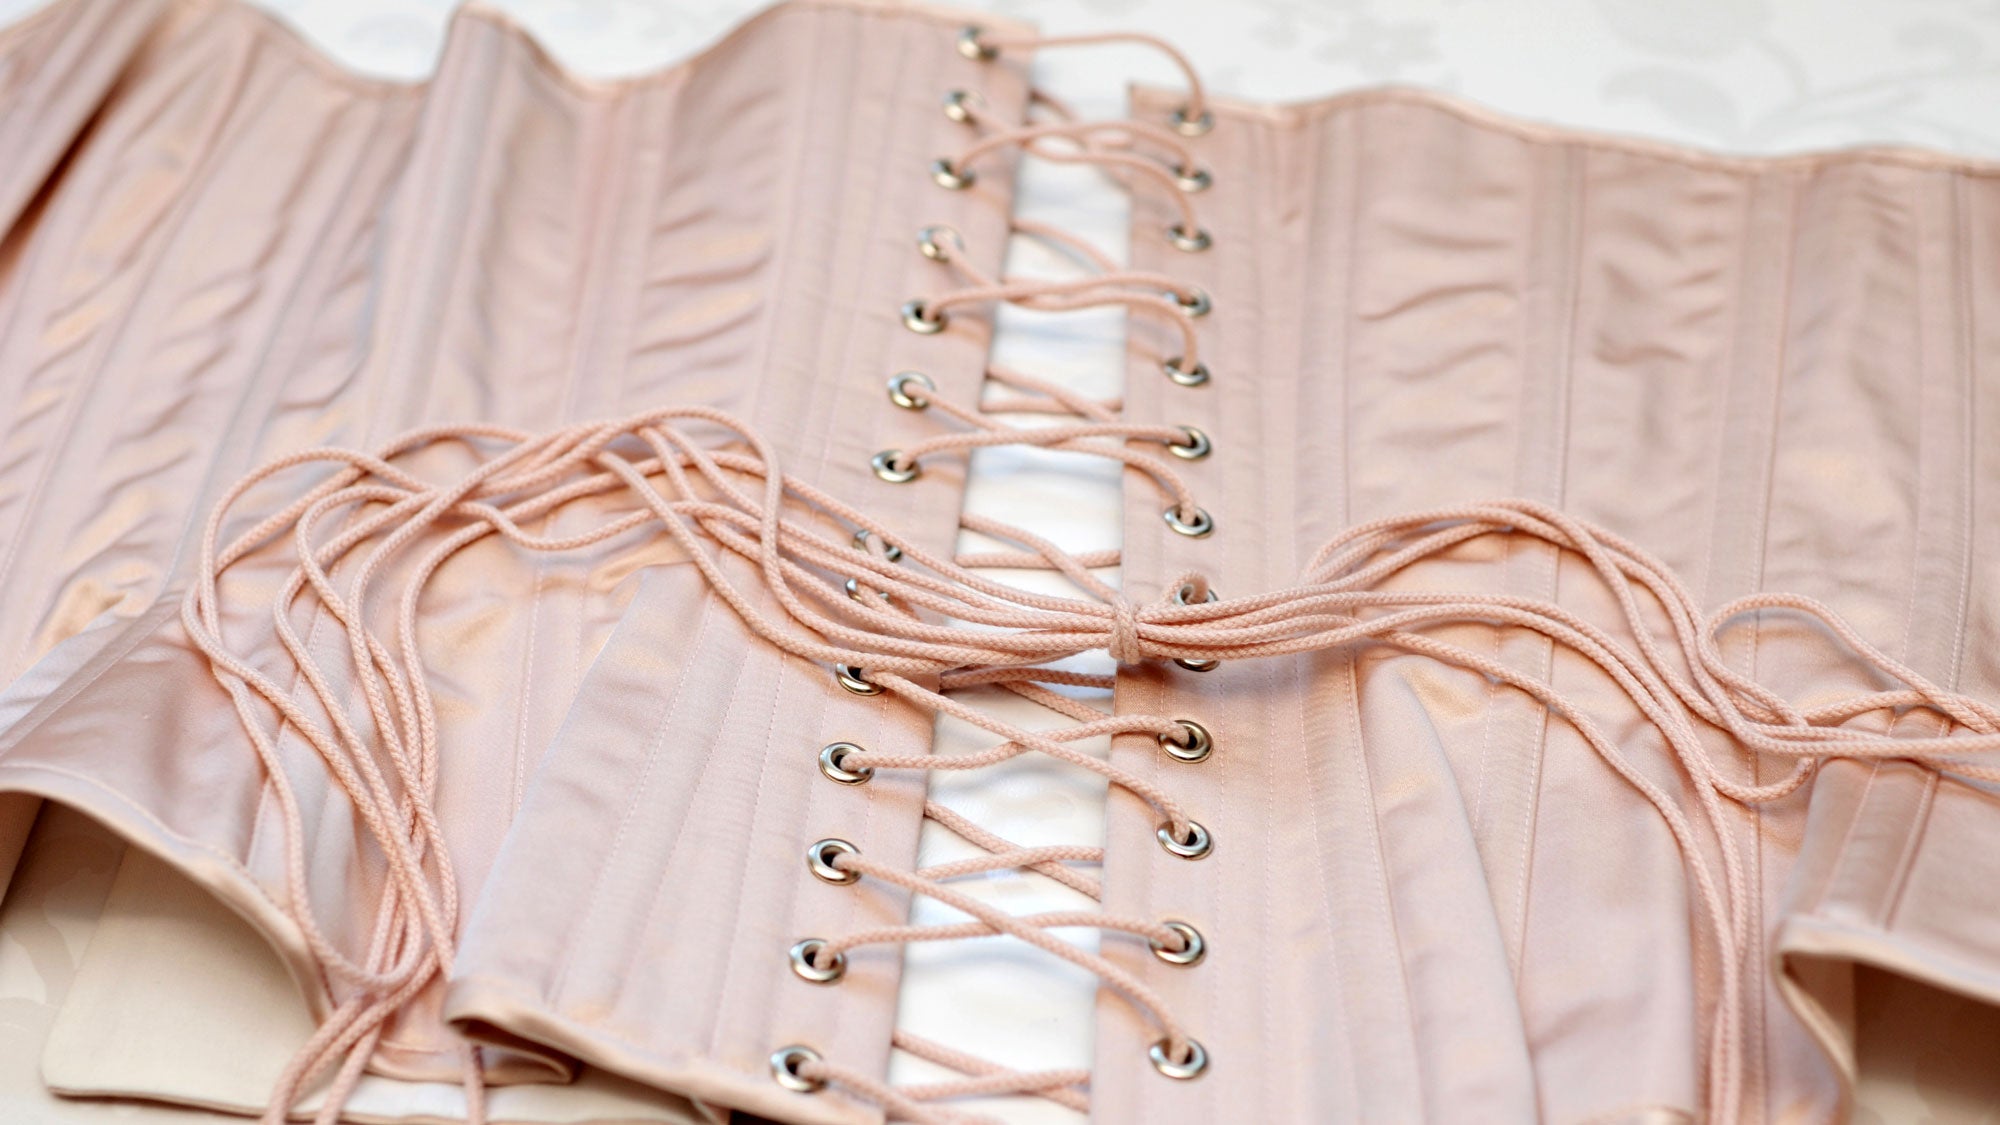 Guide on how to lace up your corset with a step by step guide to corset lacing